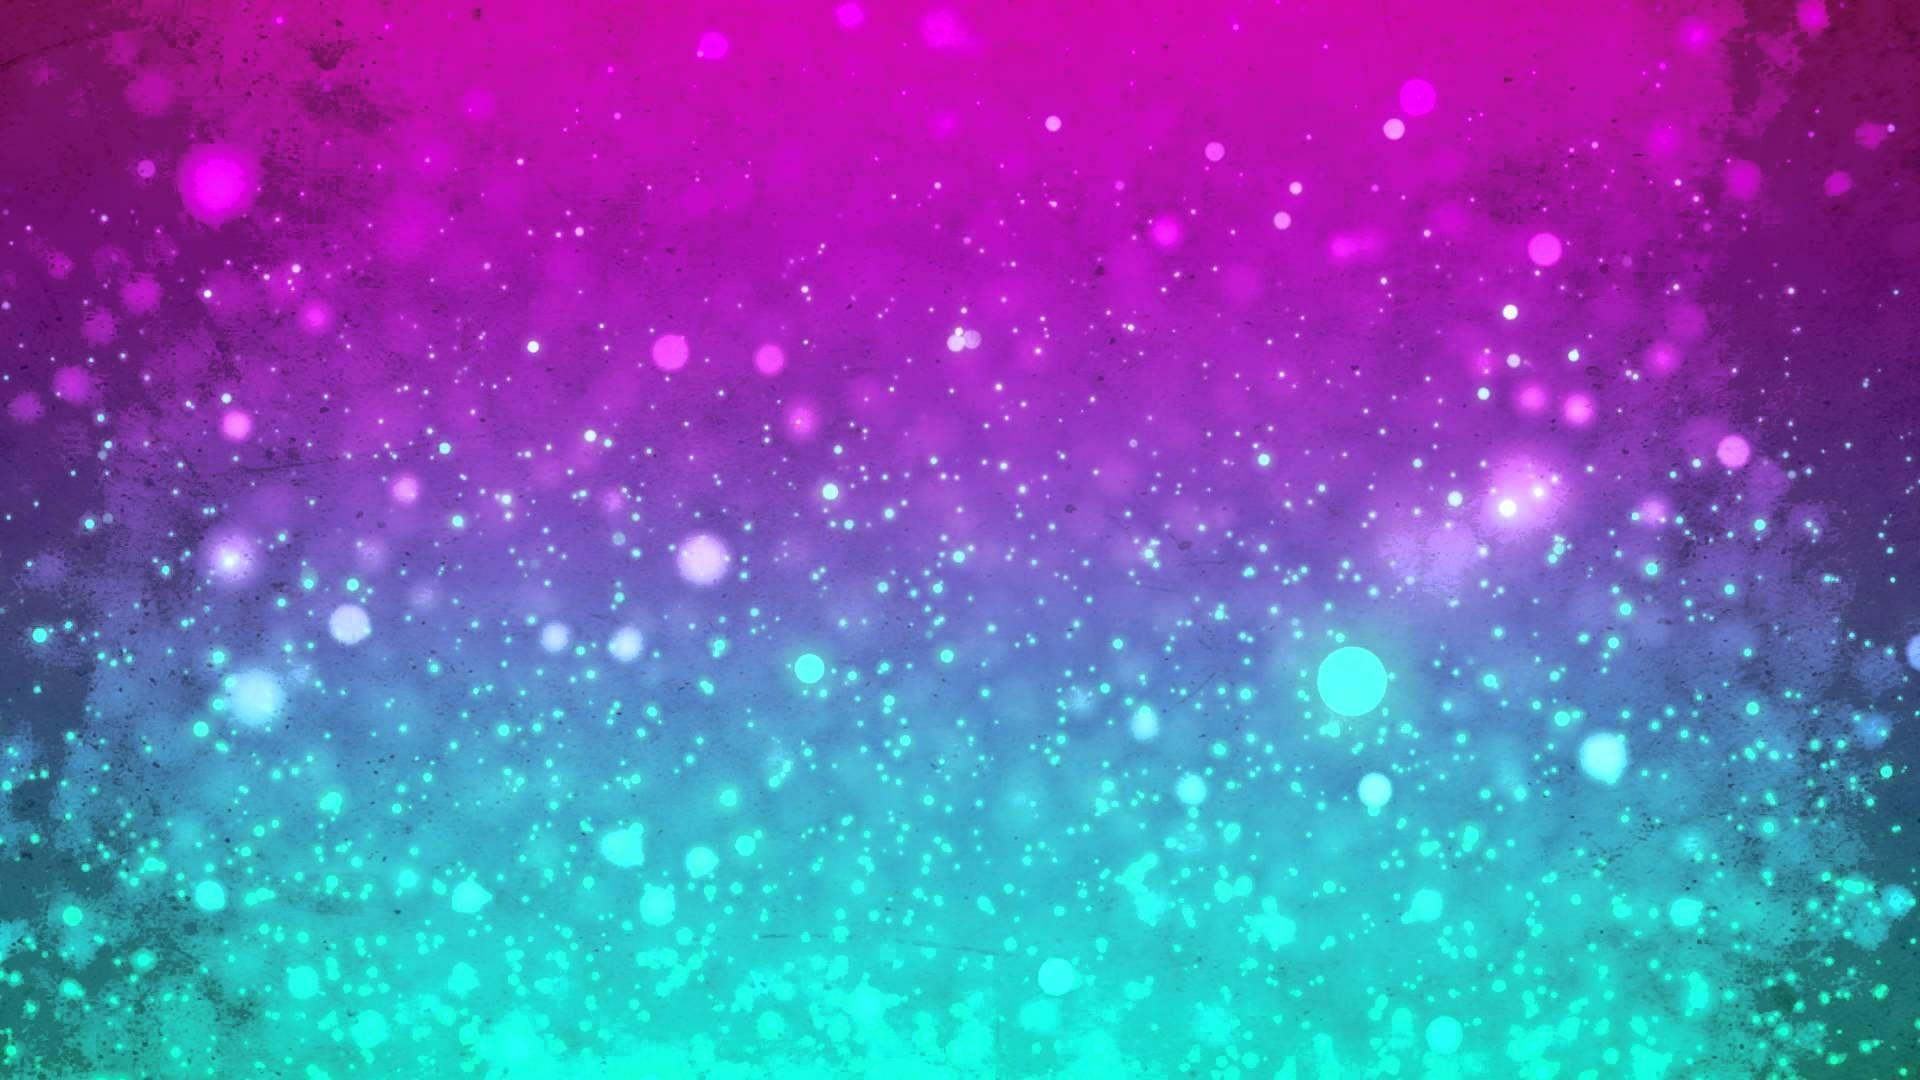 turquoise and hot pink background